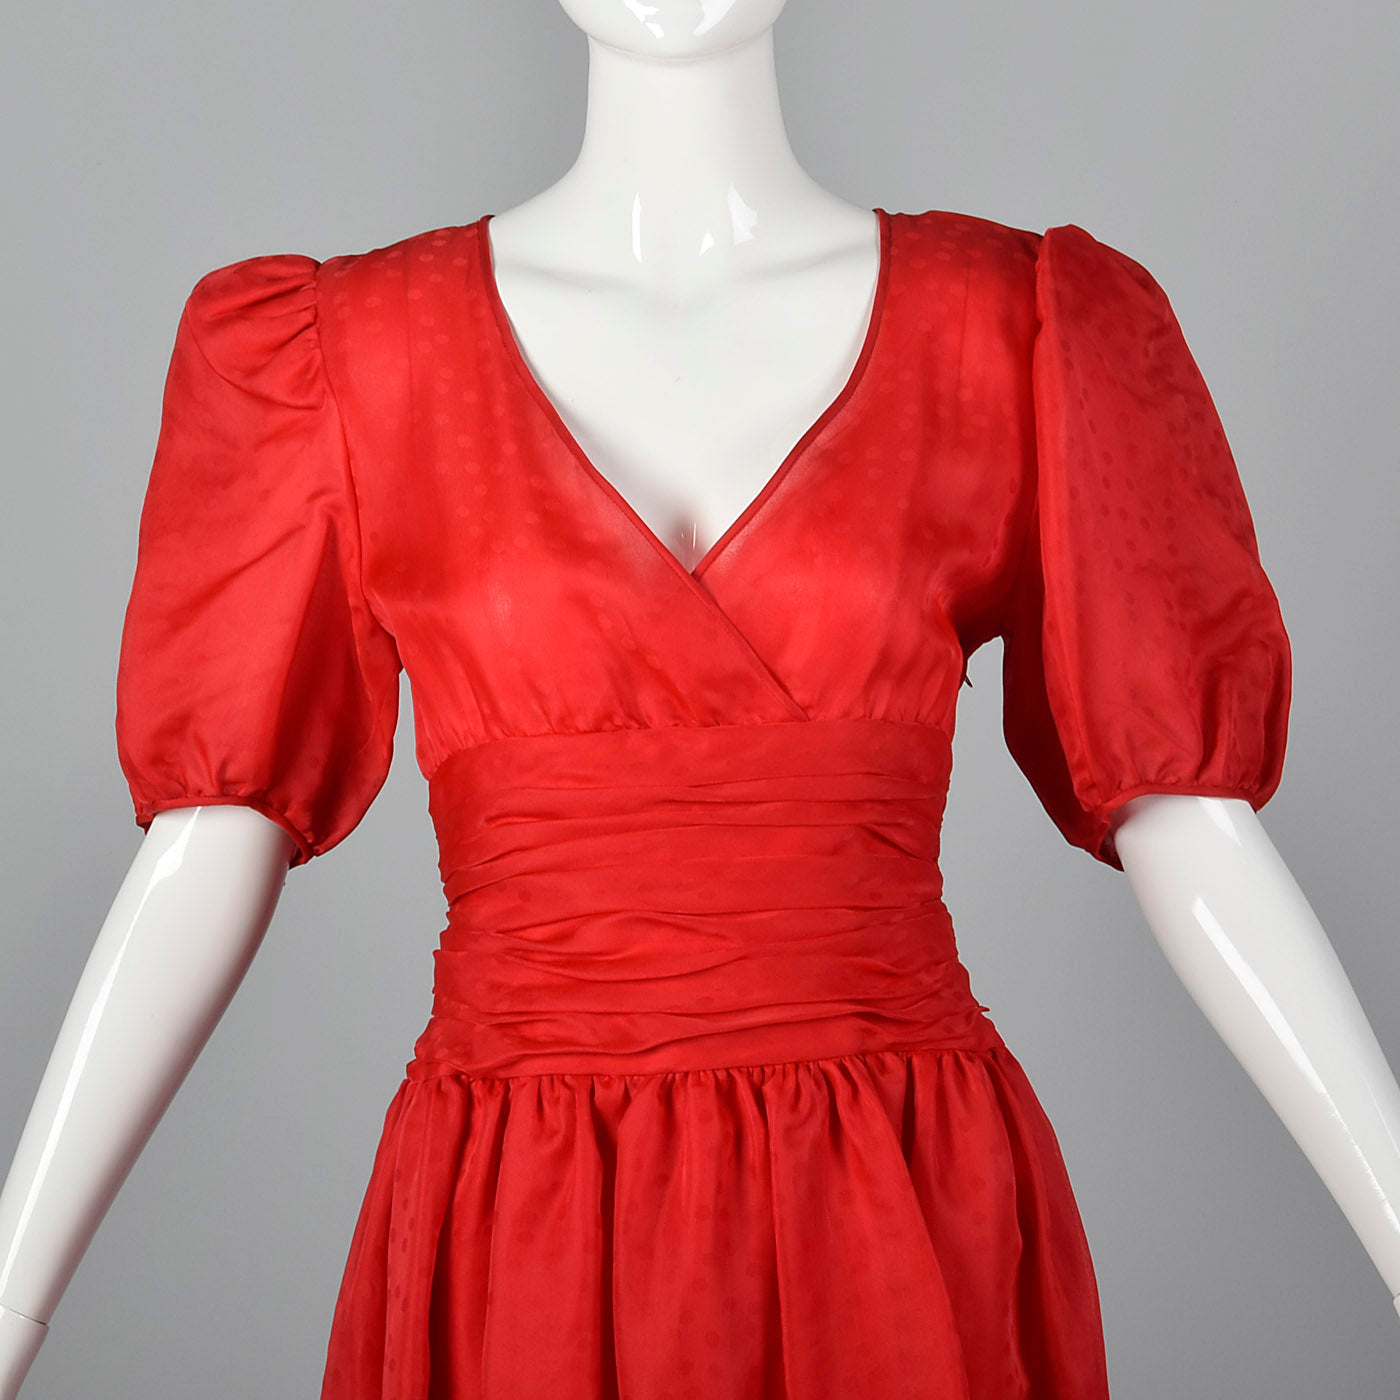 1980s Red Party Dress with Polka Dots